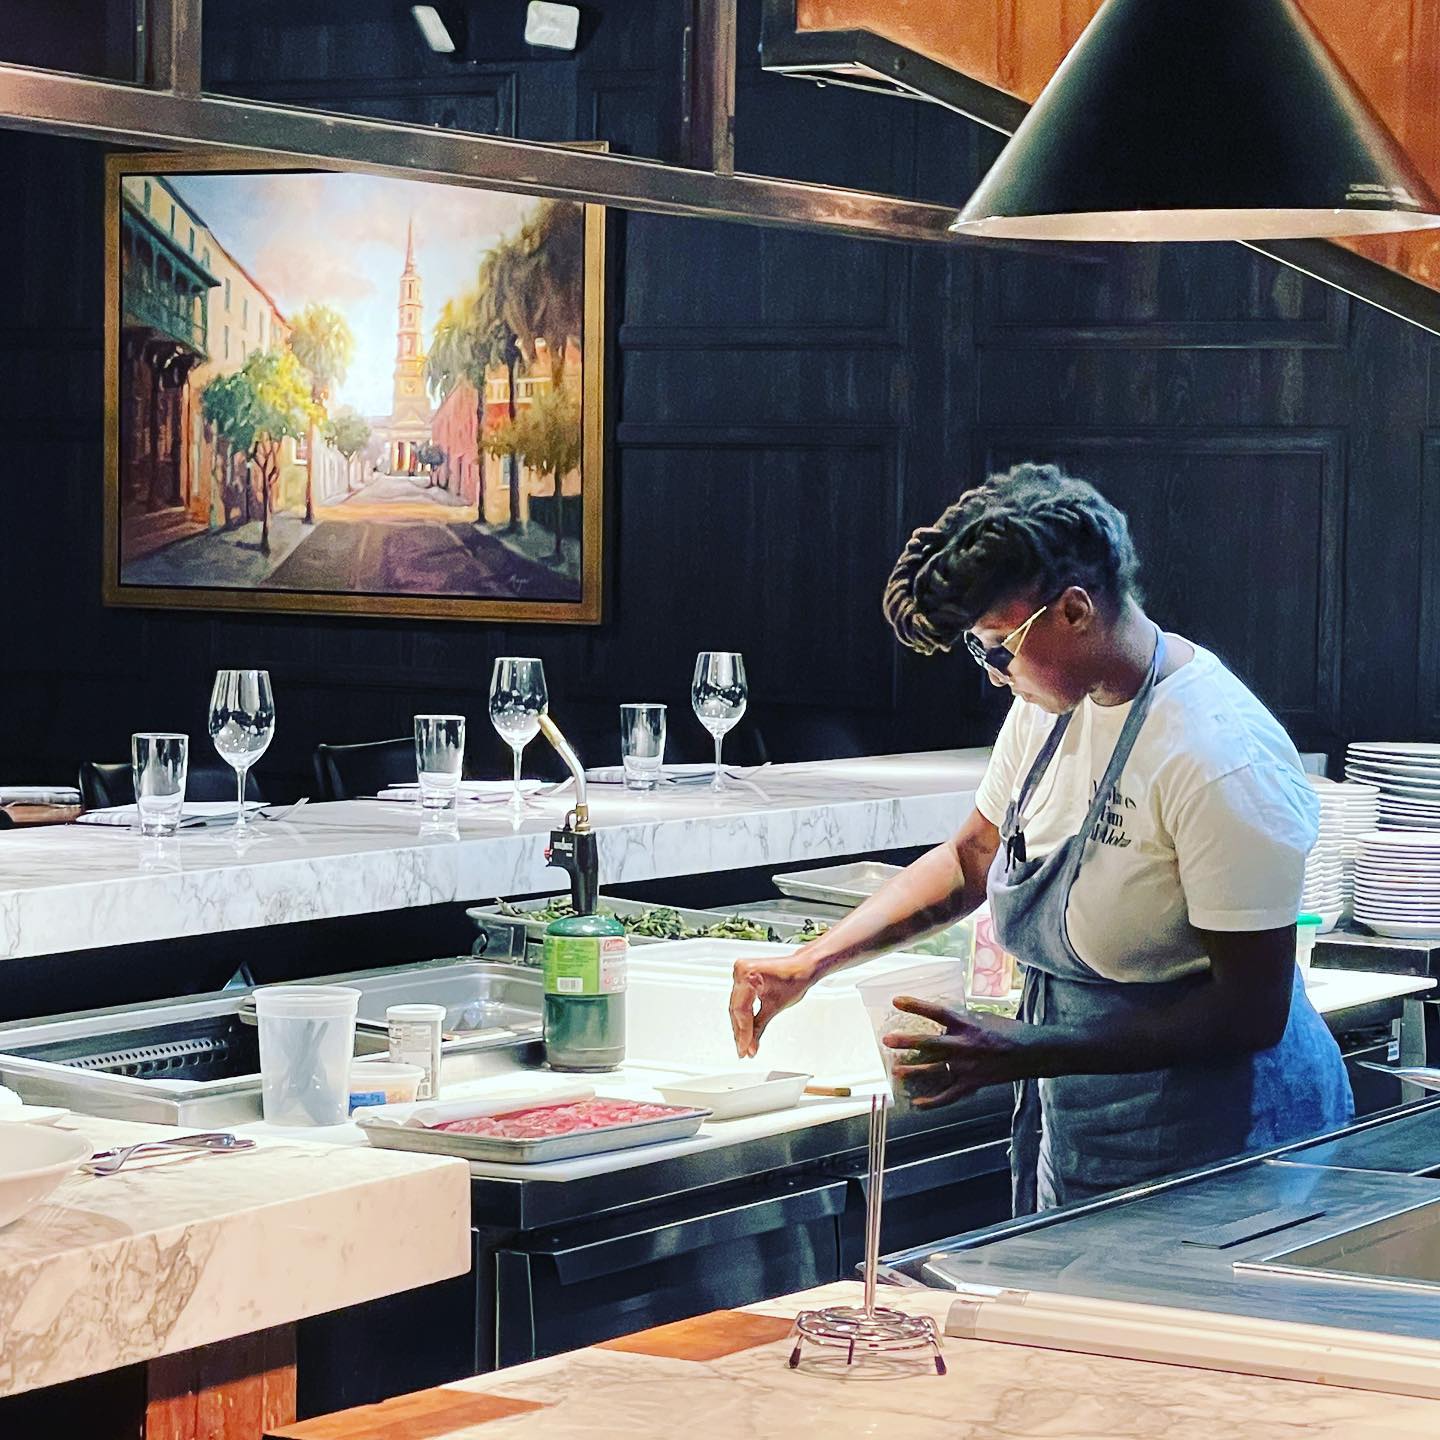 It was an honor to work with Michelin Star Chef Mariya Russell this week. We raised $10k for the CYDC and had a great time doing it. 
.
Read all about it at EstablishmentCHS.com/giveBack
.
.
#giveback #explorecharleston #southofbroad